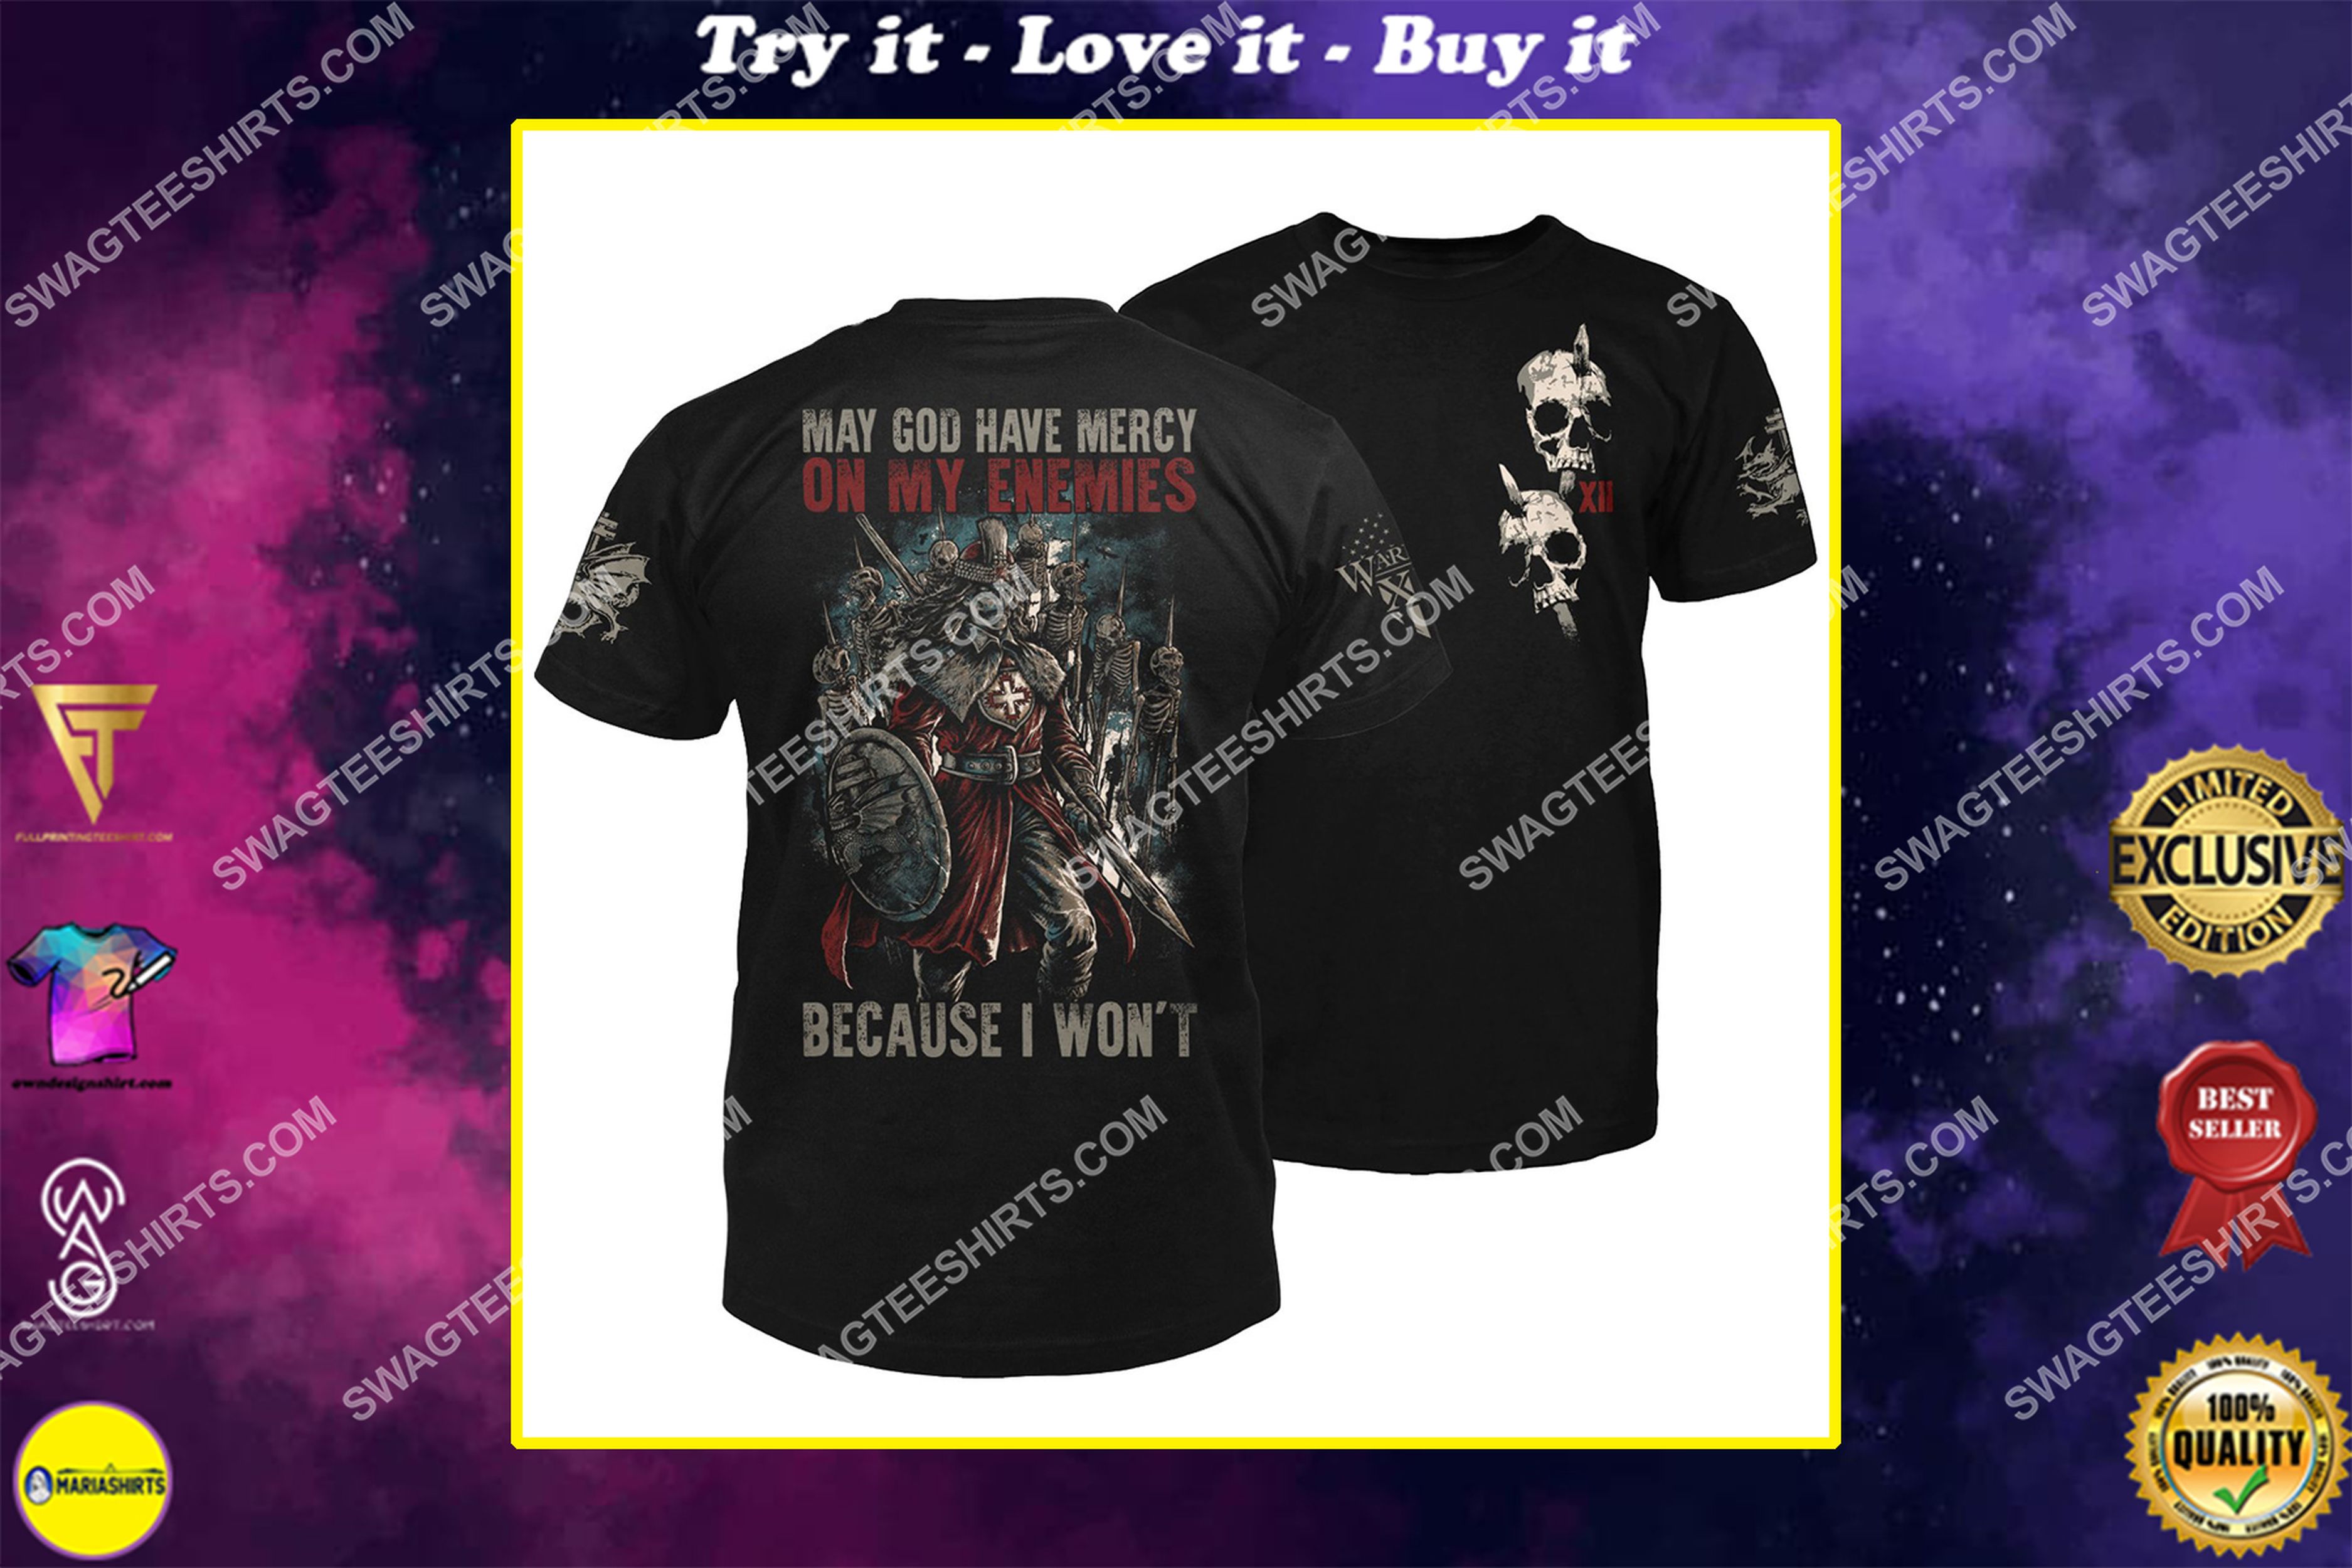 [special edition] may God have mercy on my enemies because i won’t vlad the impaler halloween shirt- maria